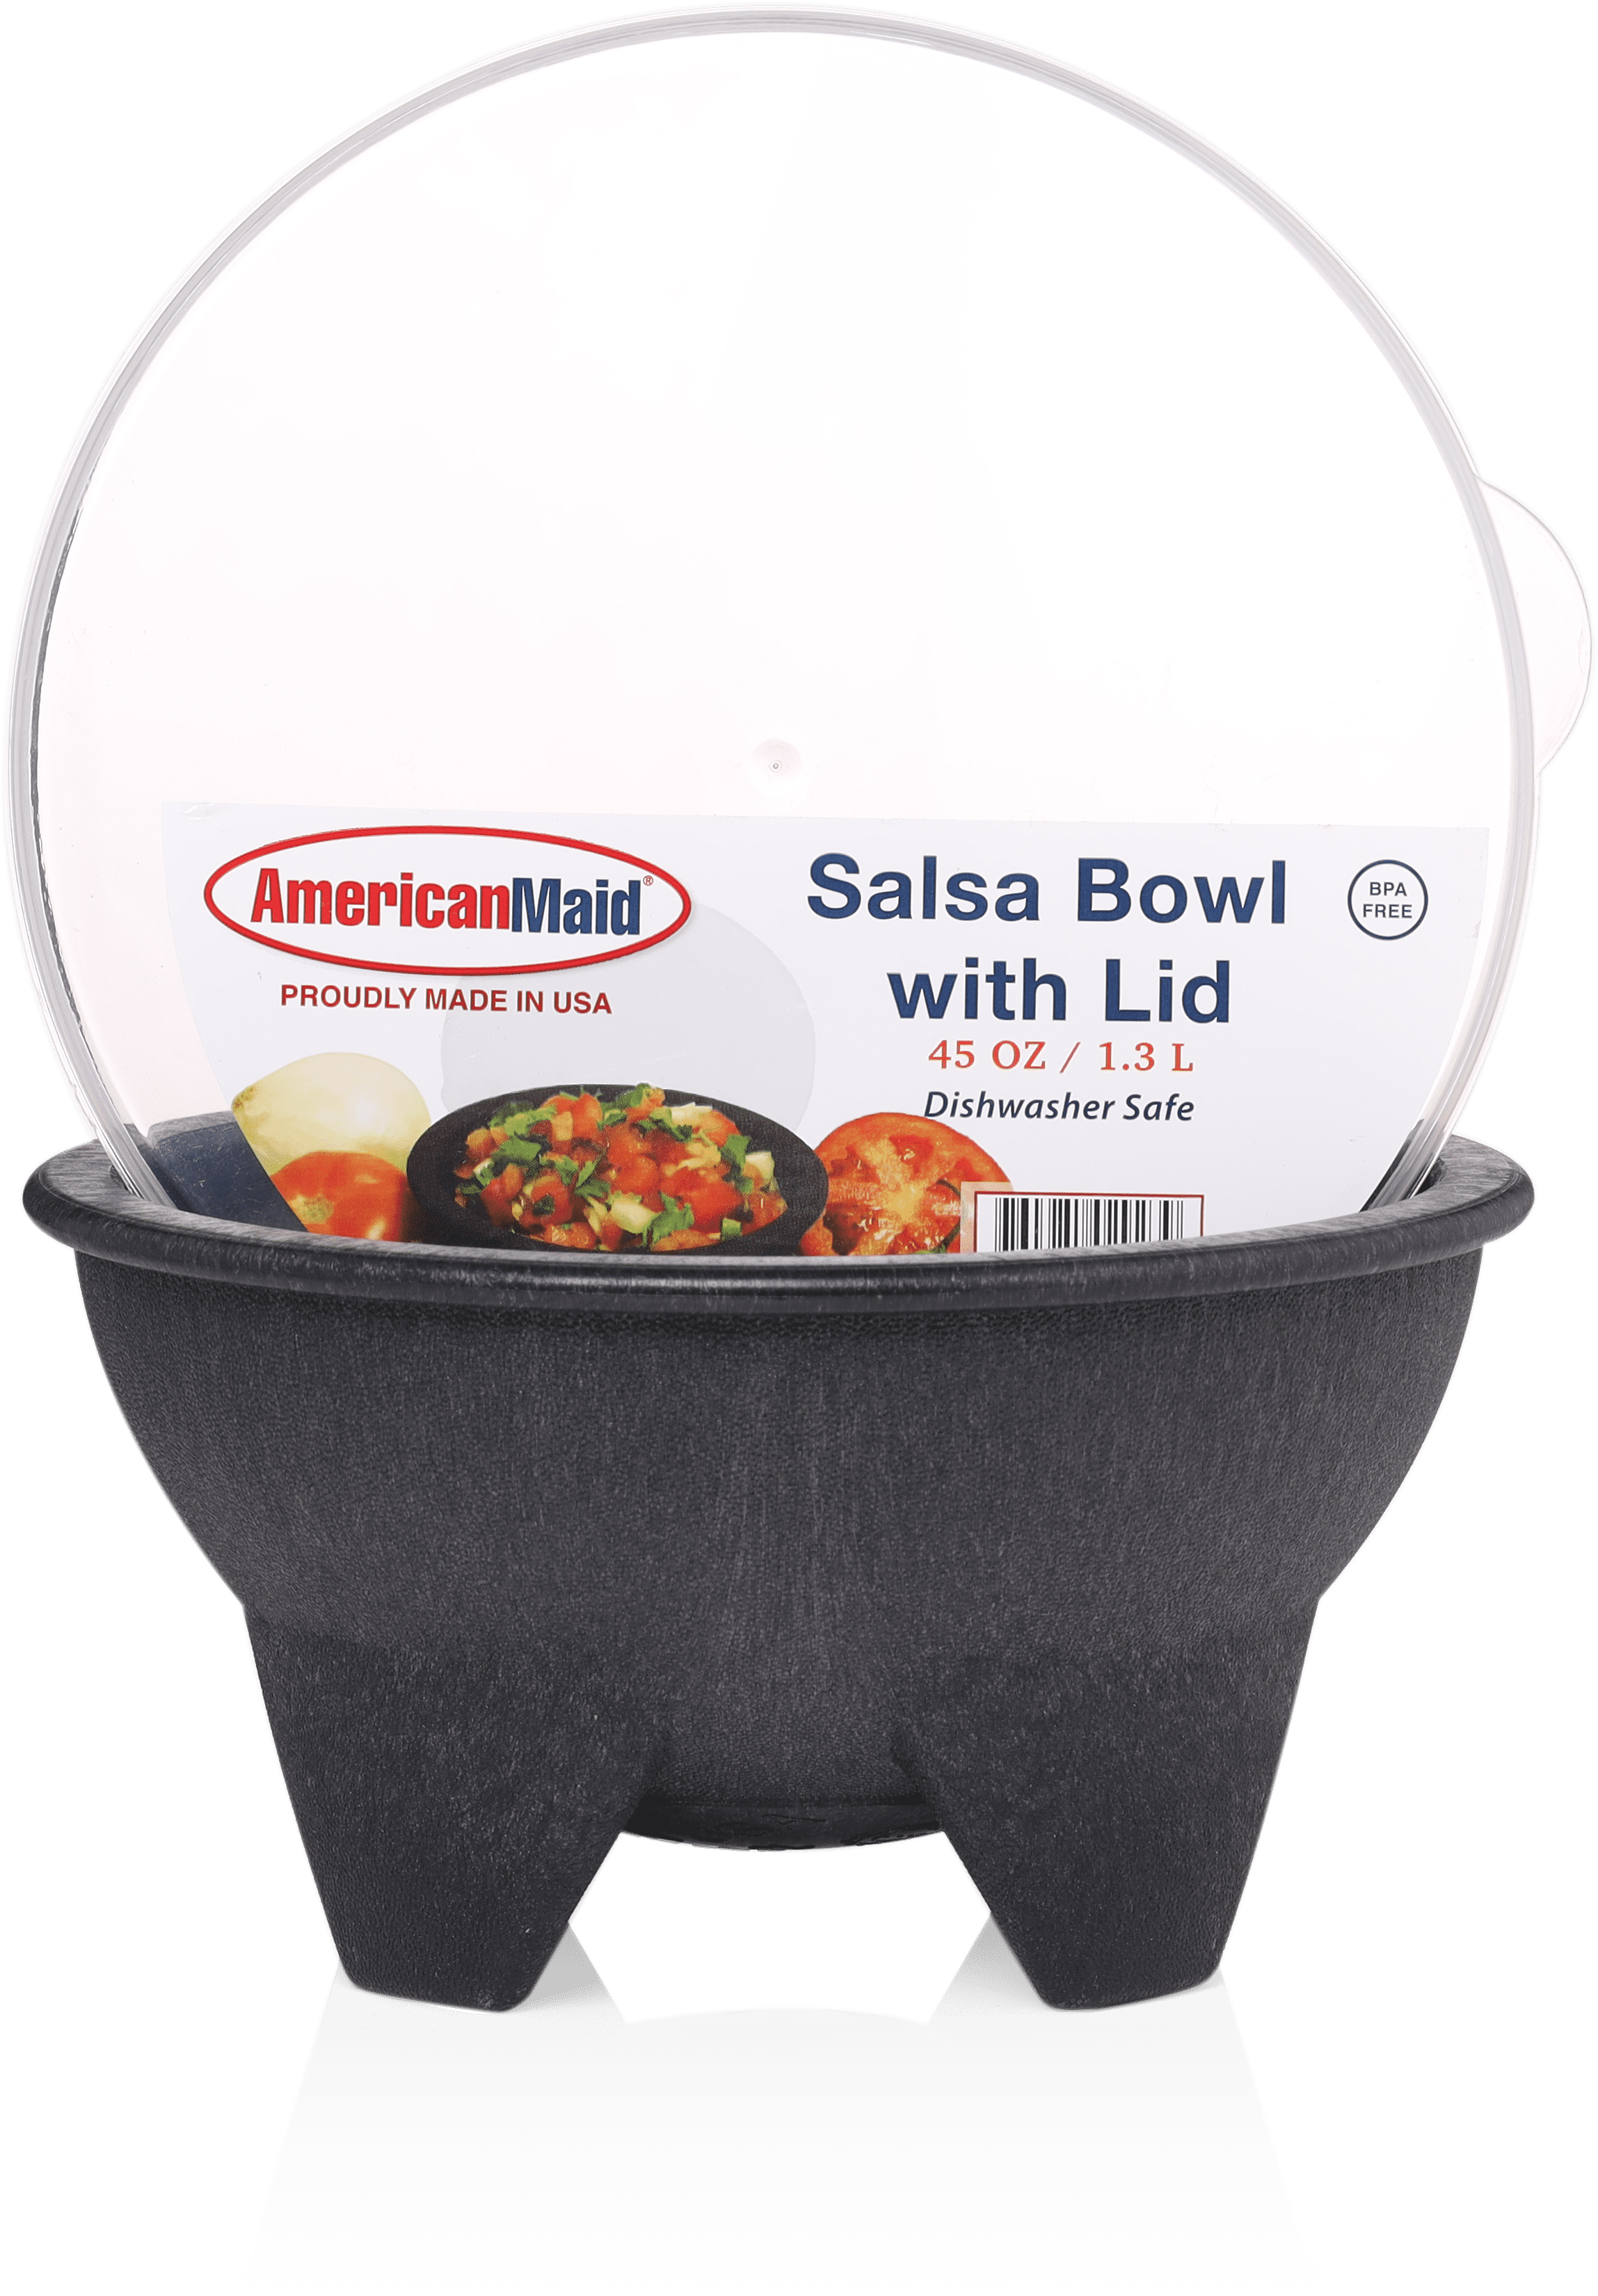 American Maid Small Salsa Bowl with Lid, 2 pc - Kroger